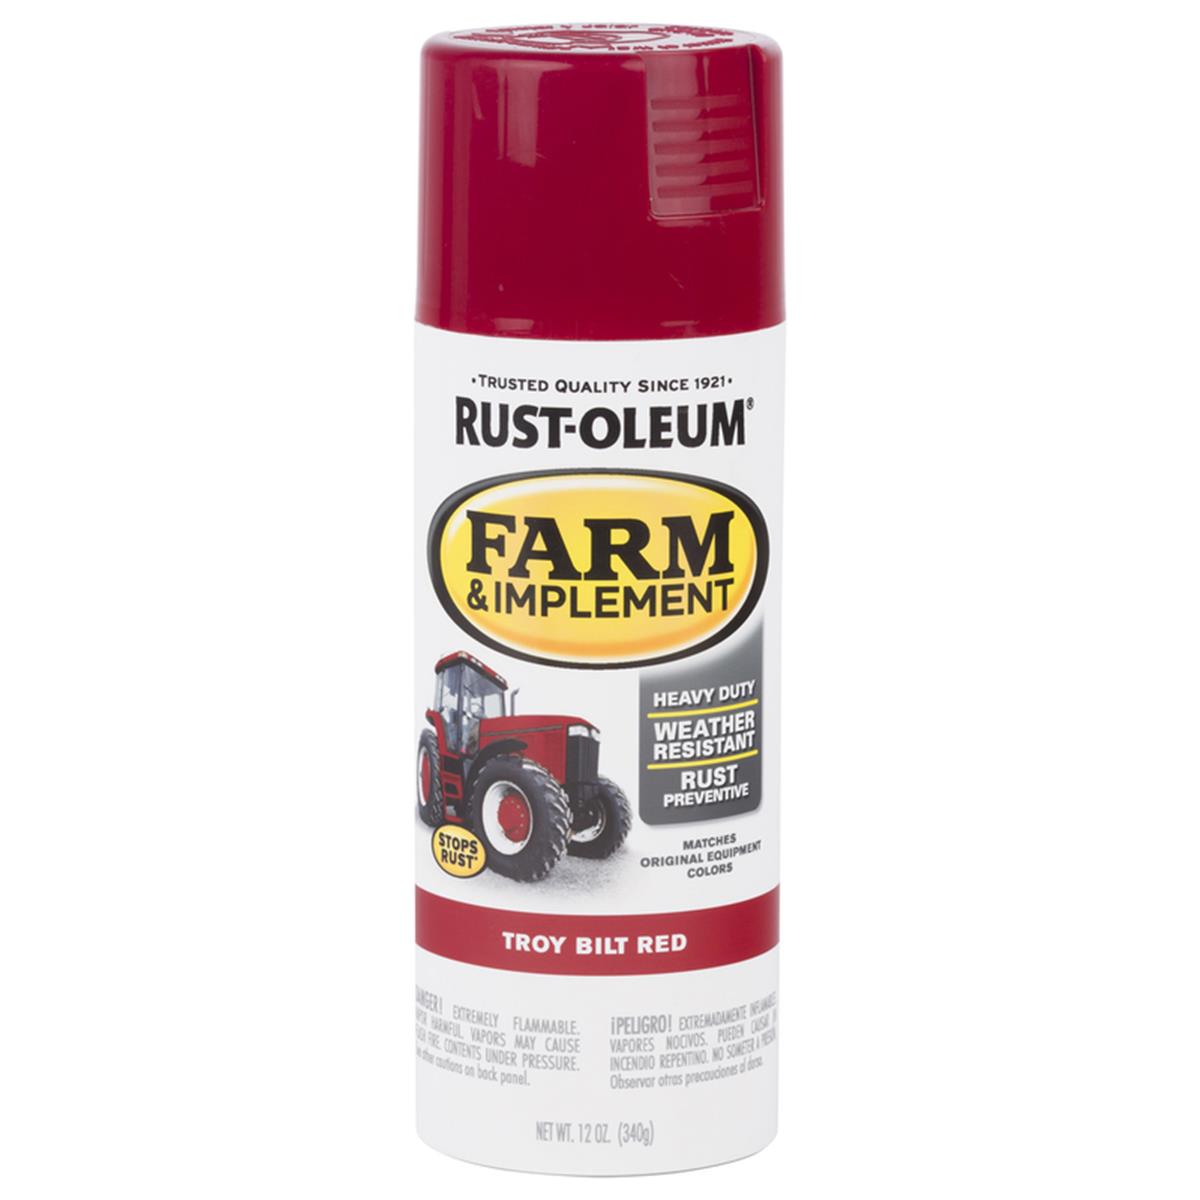 1002900 Specialty Farm & Implement Indoor & Outdoor Gloss Troy Bilt Red Rust Prevention Paint - Case Of 6